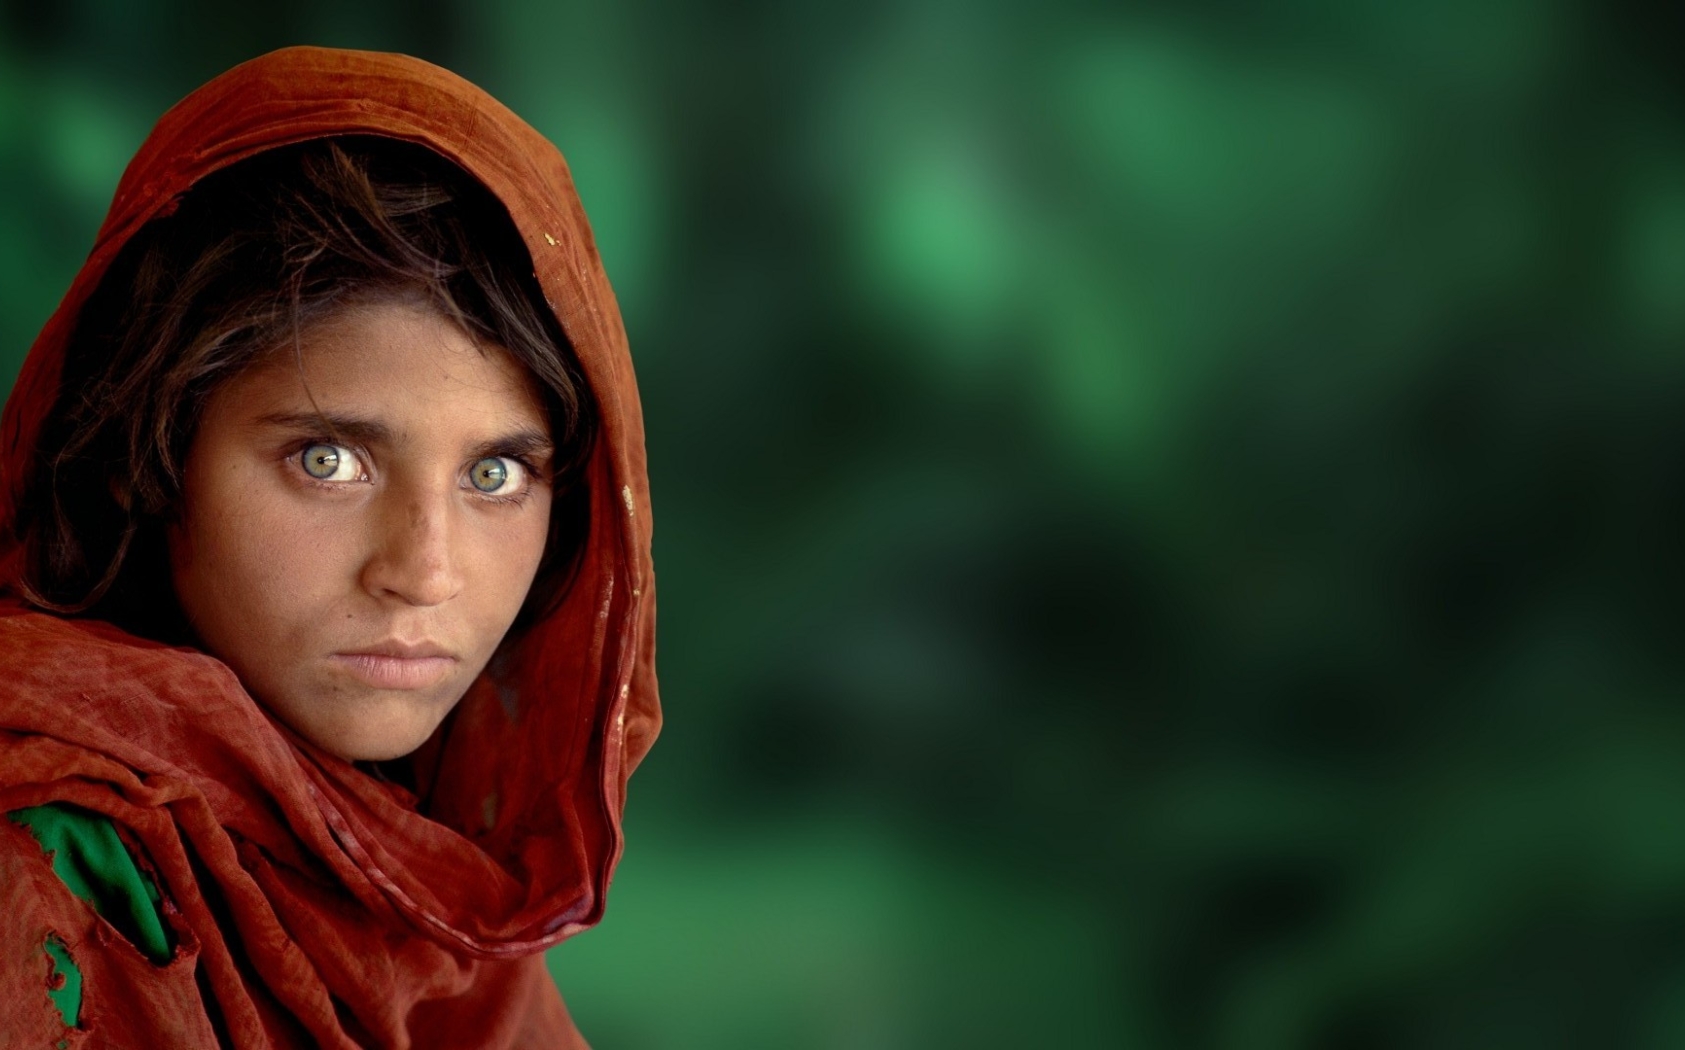 Afghan Girl Photo Wallpaper And Image Pictures Photos